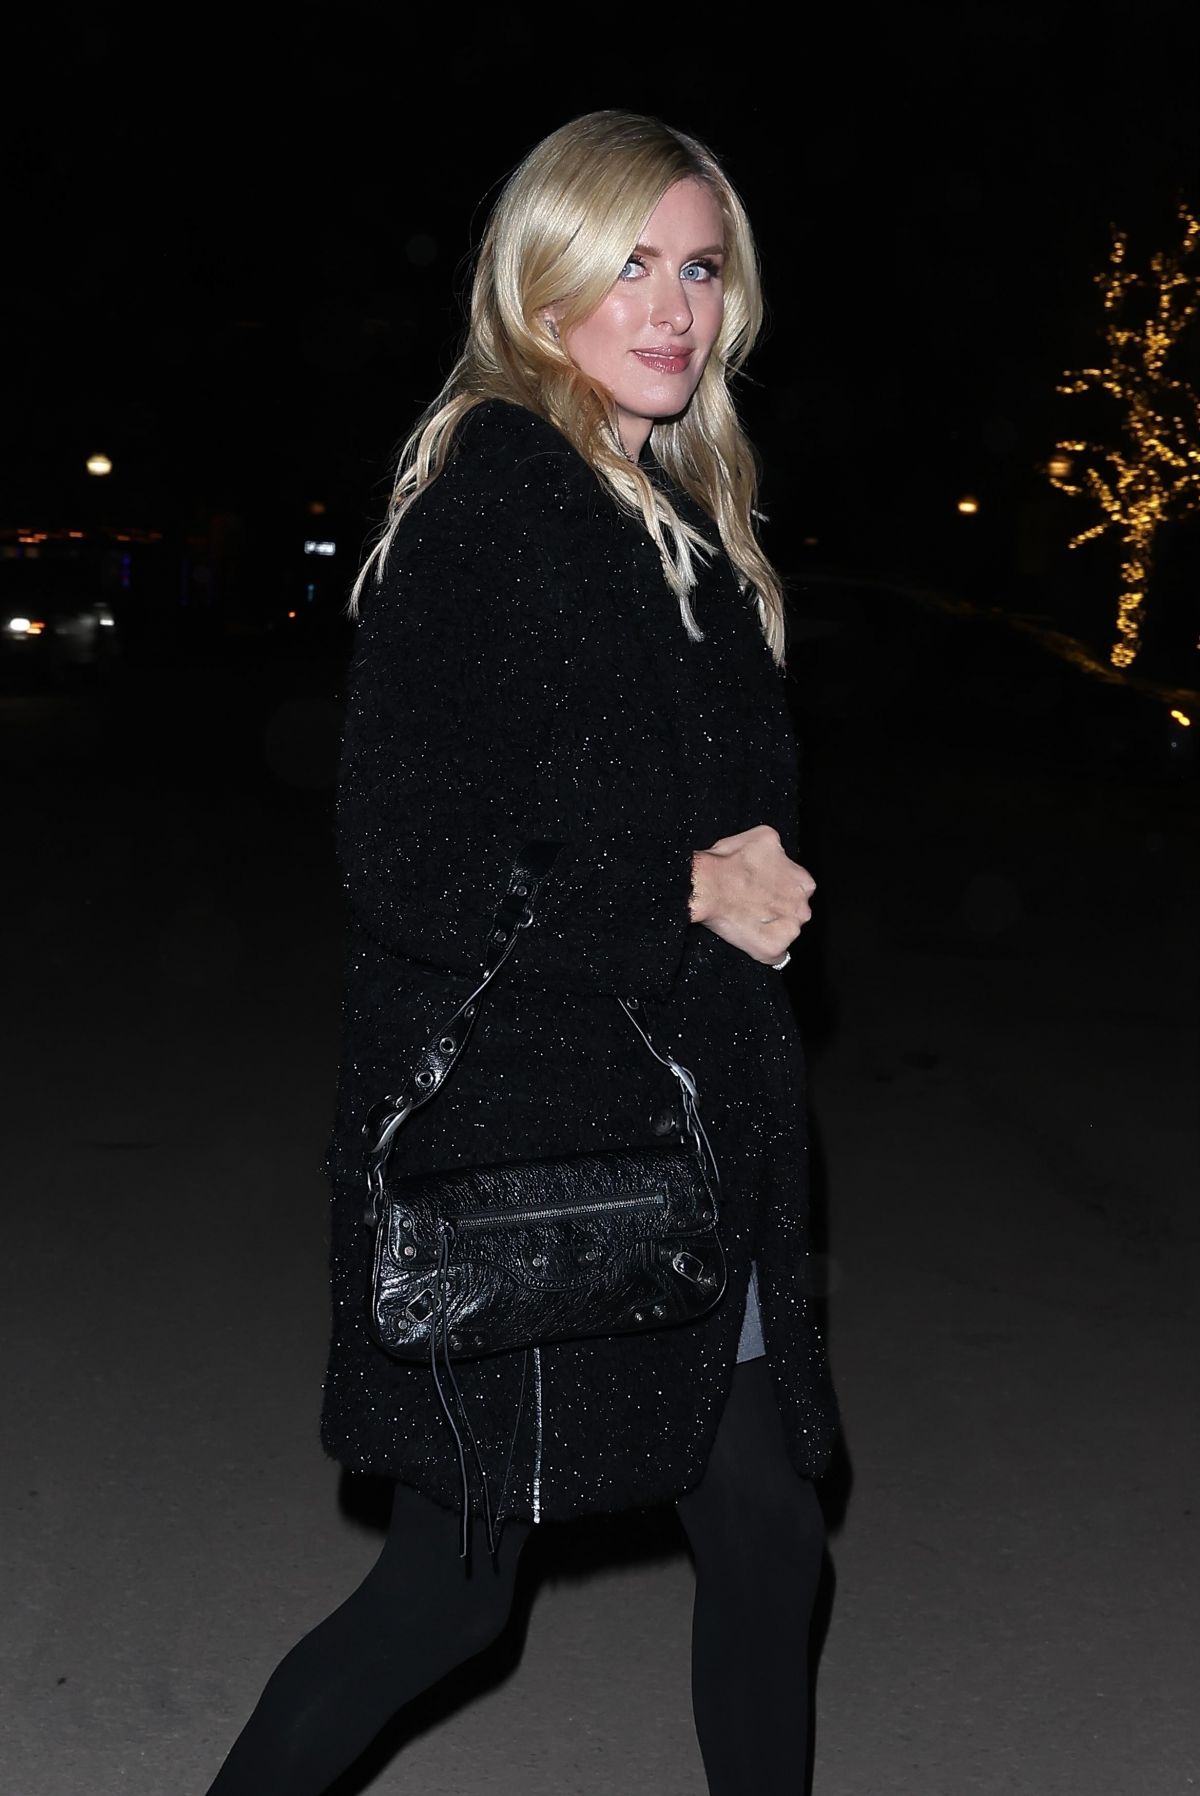 Nicky Hilton in Chic Black Outfit Leaving Kemo Sabe Aspen